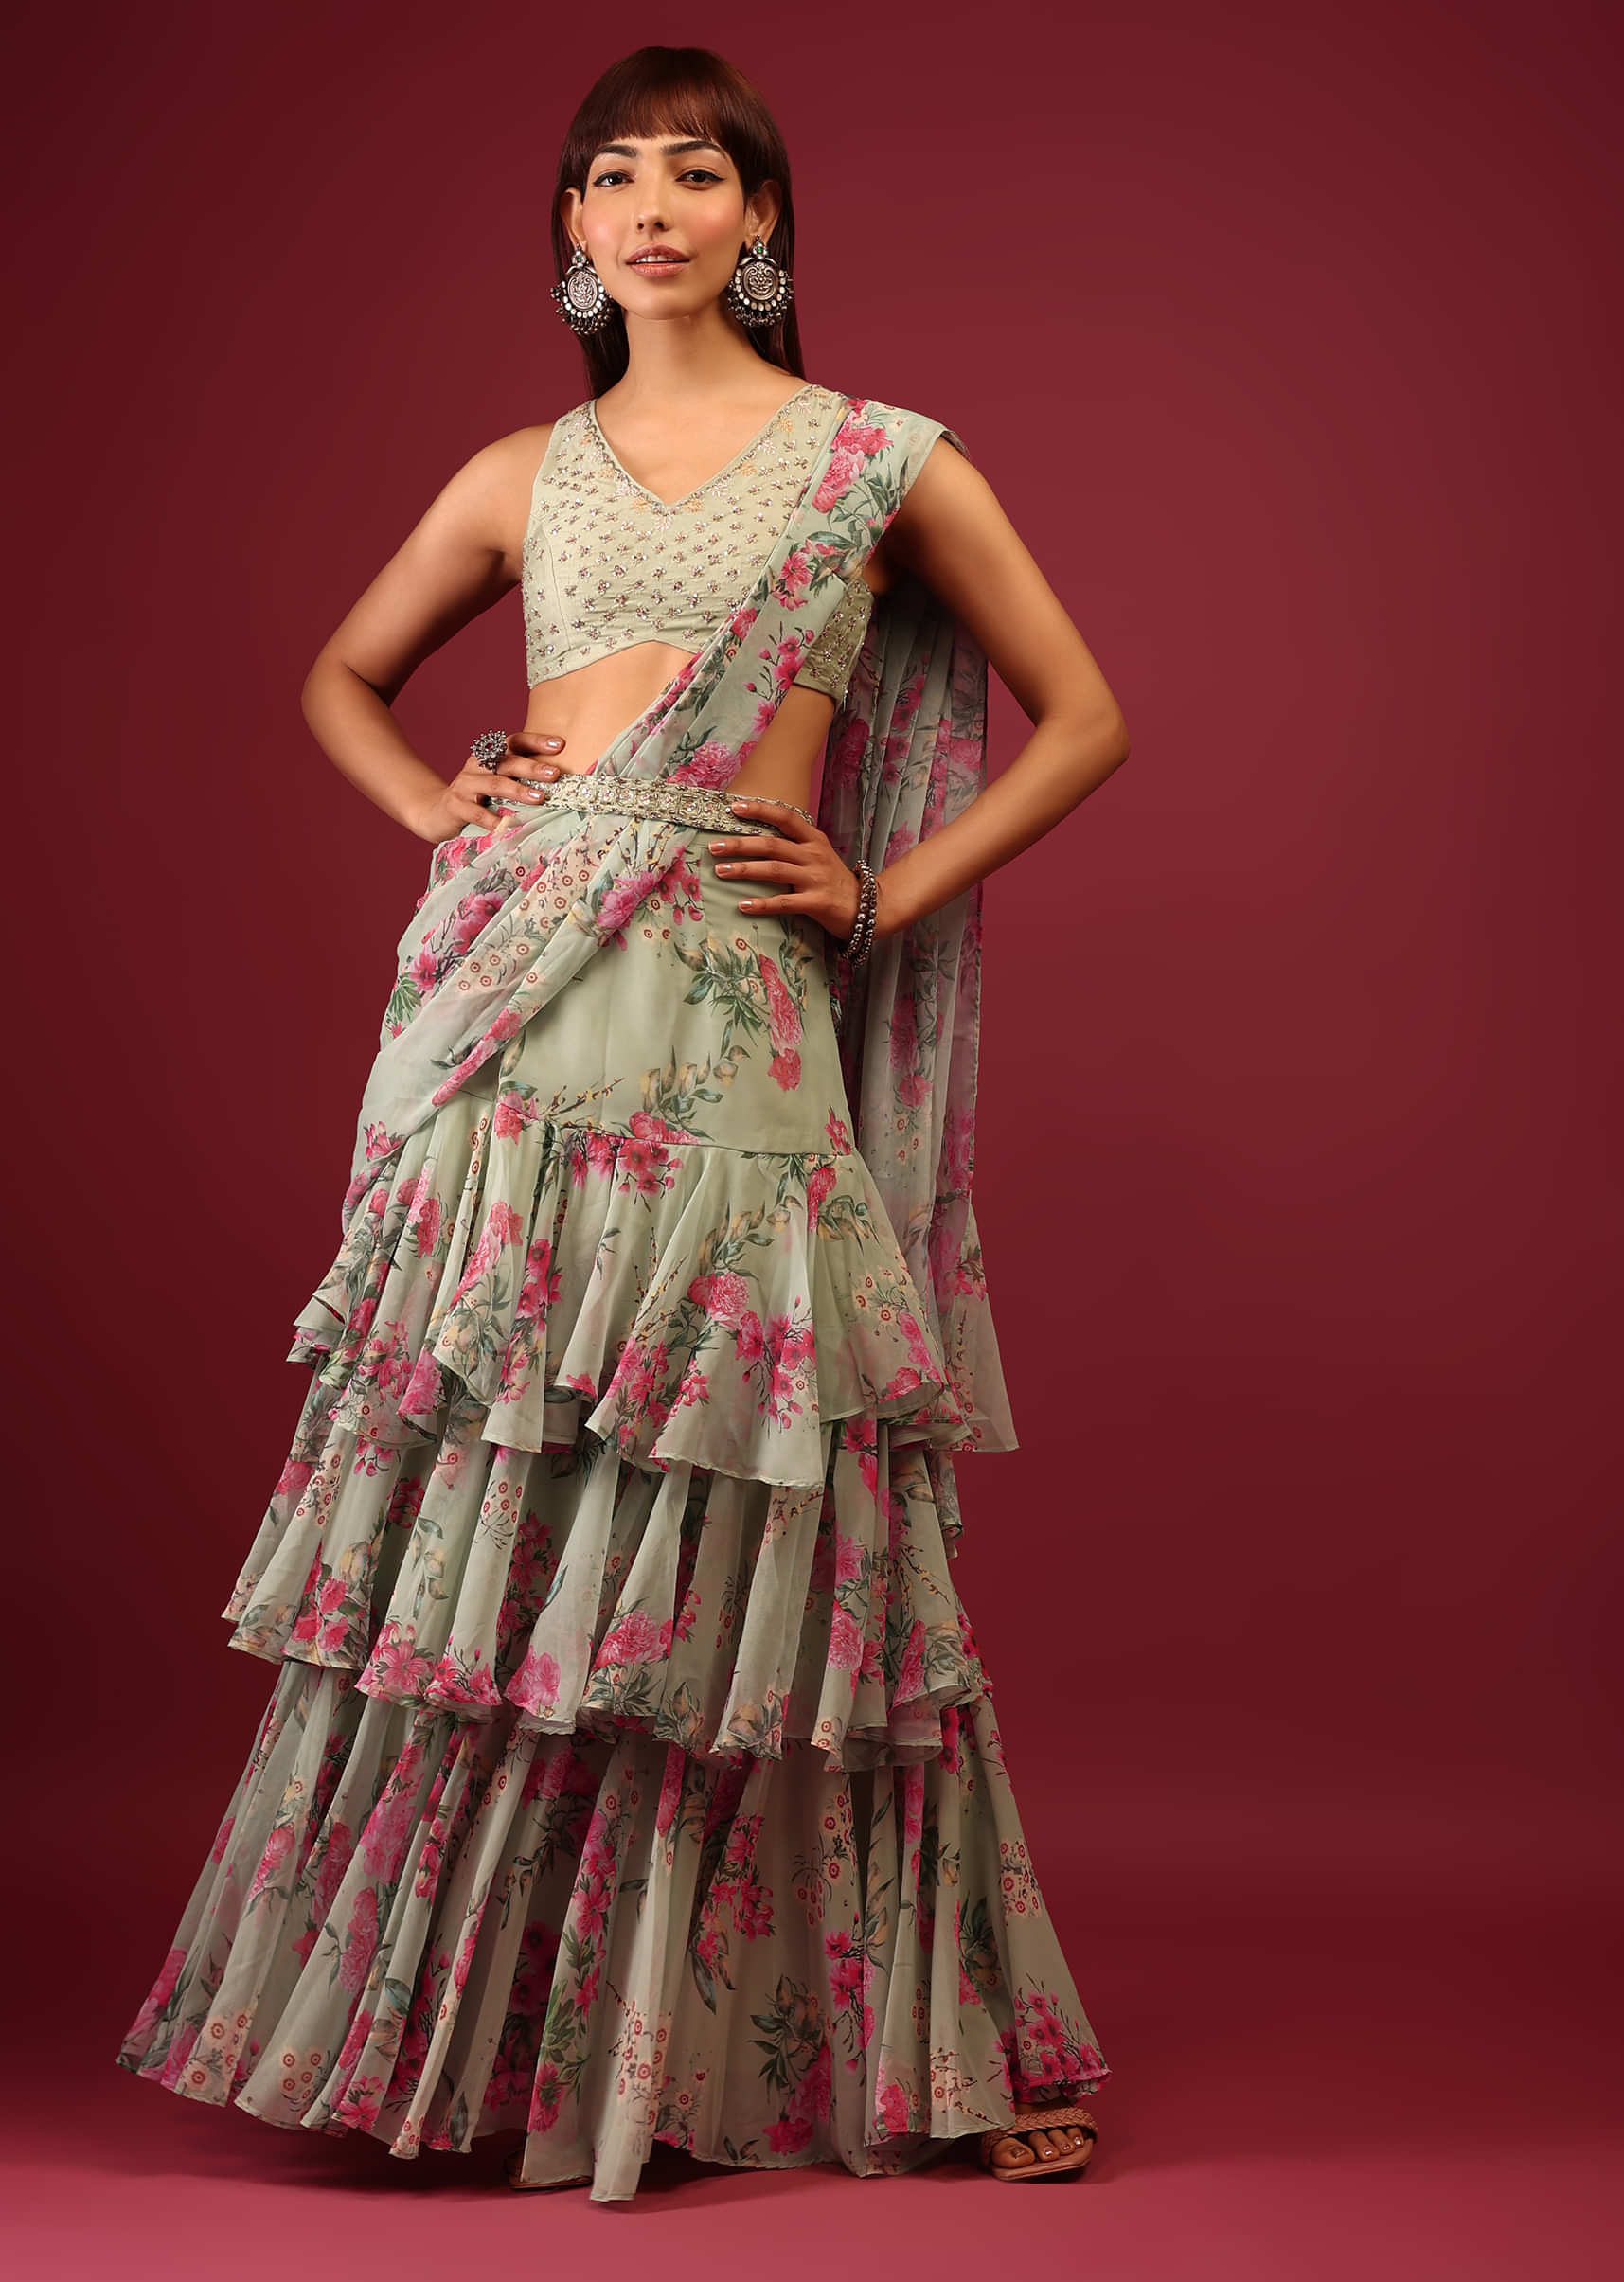 Classy Georgette Floral Printed Ruffle Lehenga Saree With Blouse